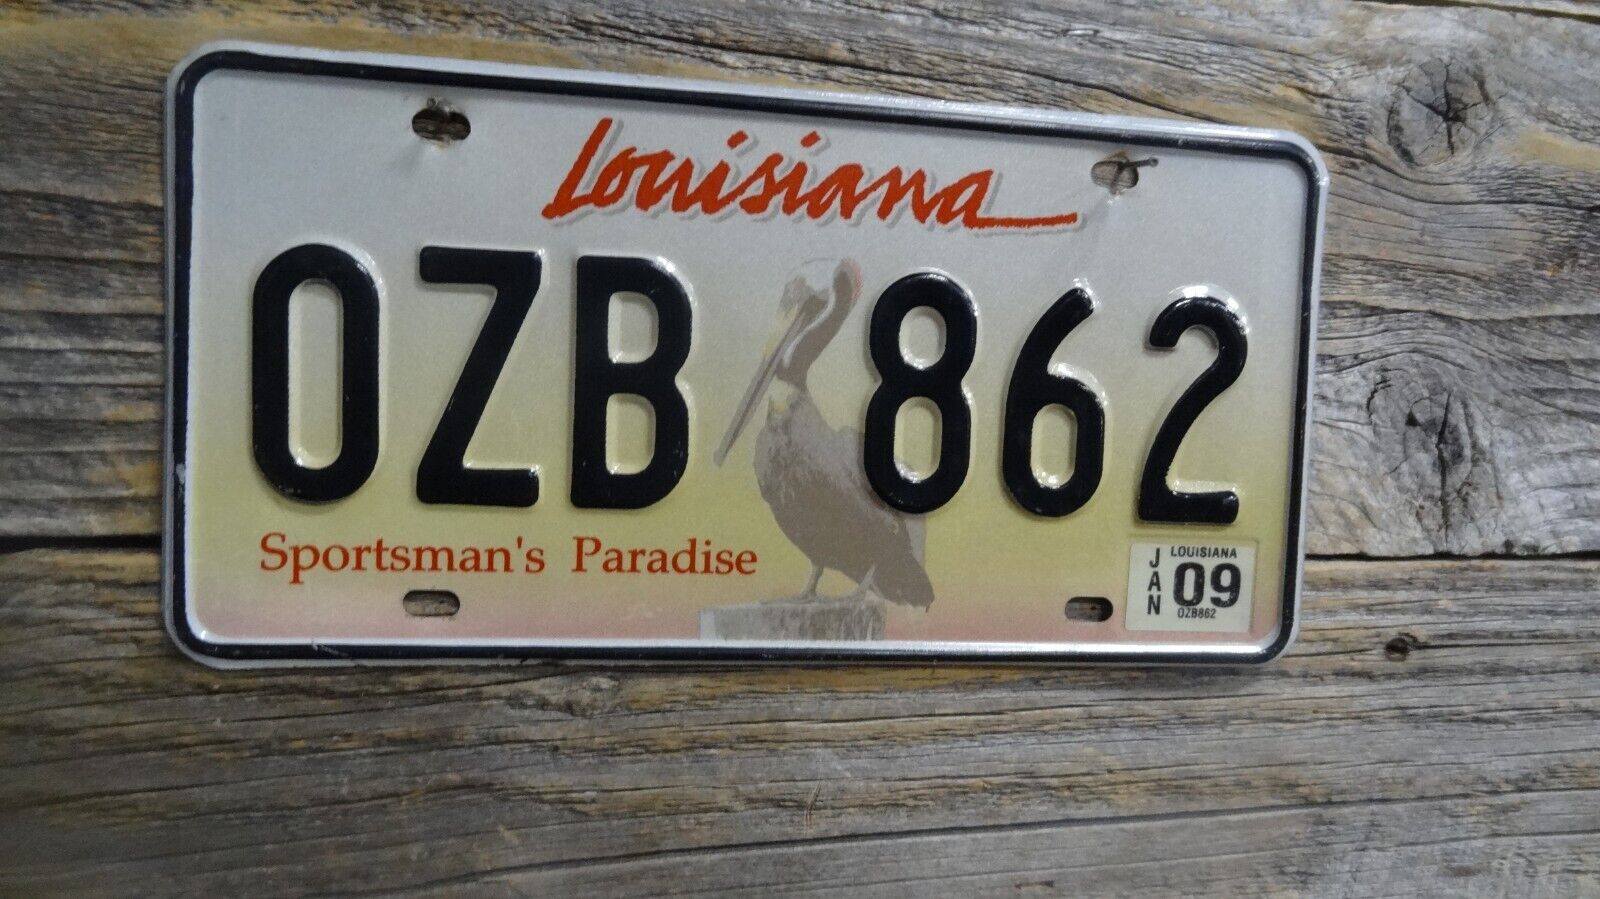 Louisiana Sportsman Paradise 2009 Pelican License Plate in Great Condition